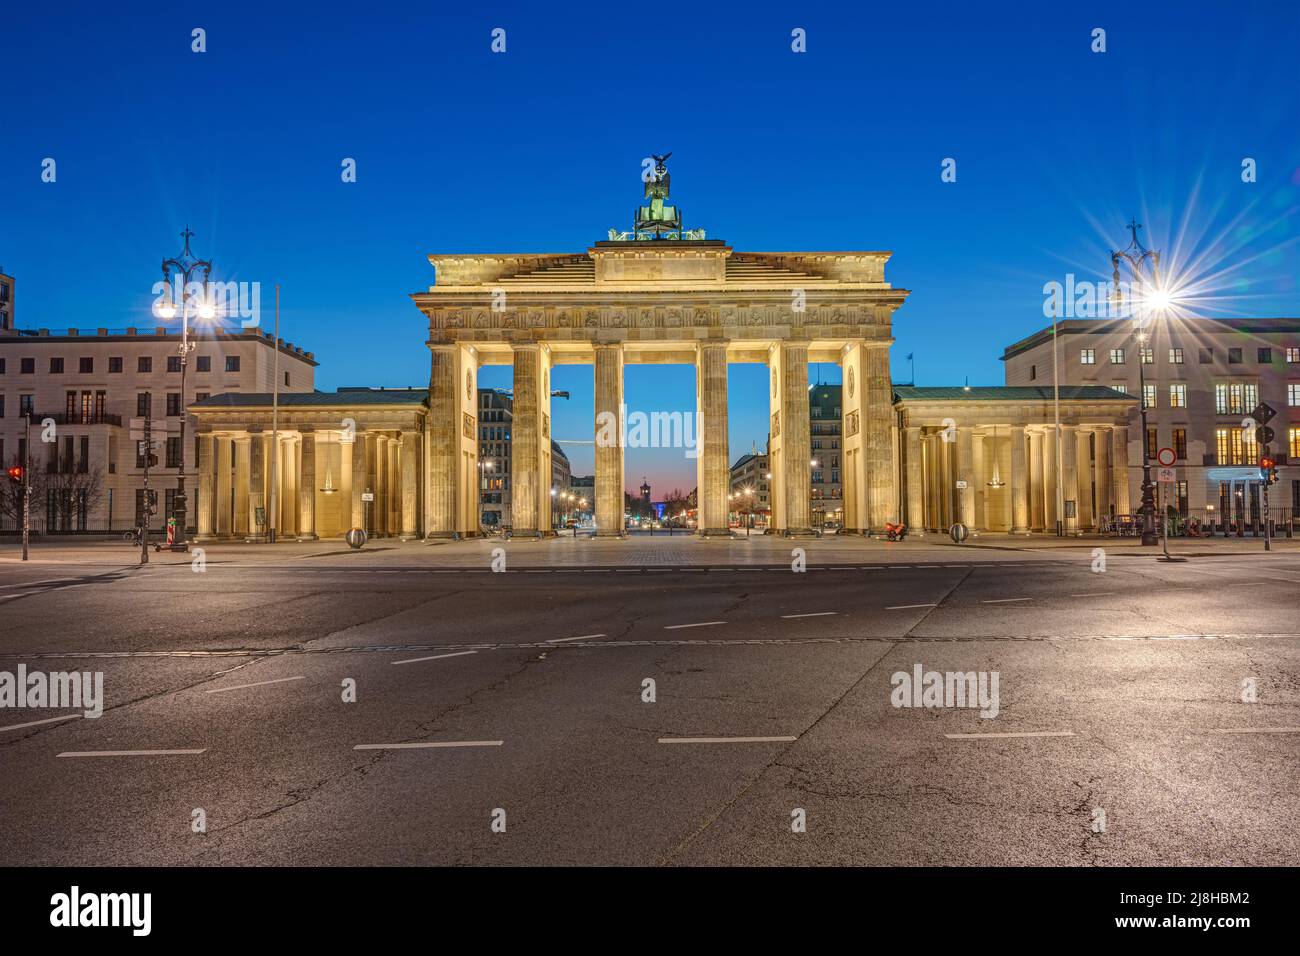 The famous Brandenburg Gate in Berlin at night seen from the backside Stock Photo